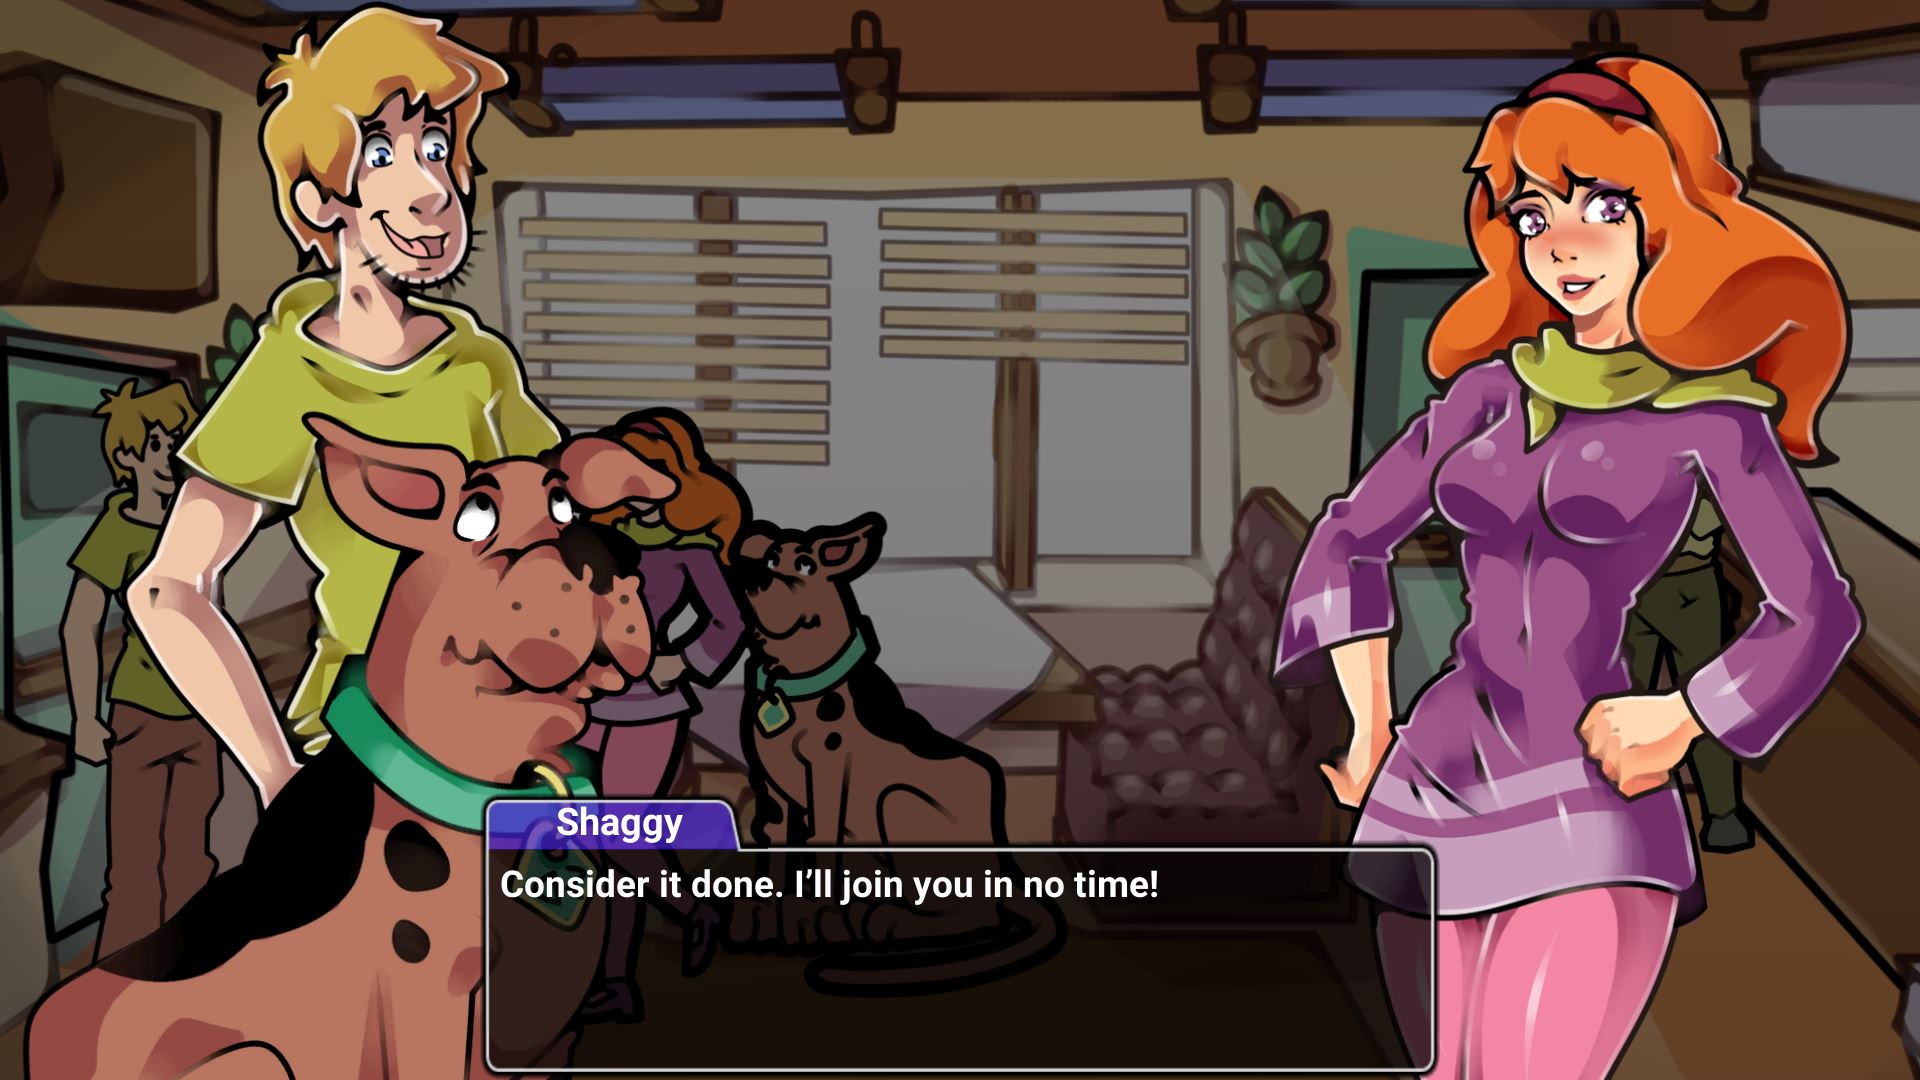 Scooby-Doo! A Depraved Investigation Unity Porn Sex Game v.2 Download for  Windows, Linux, Android